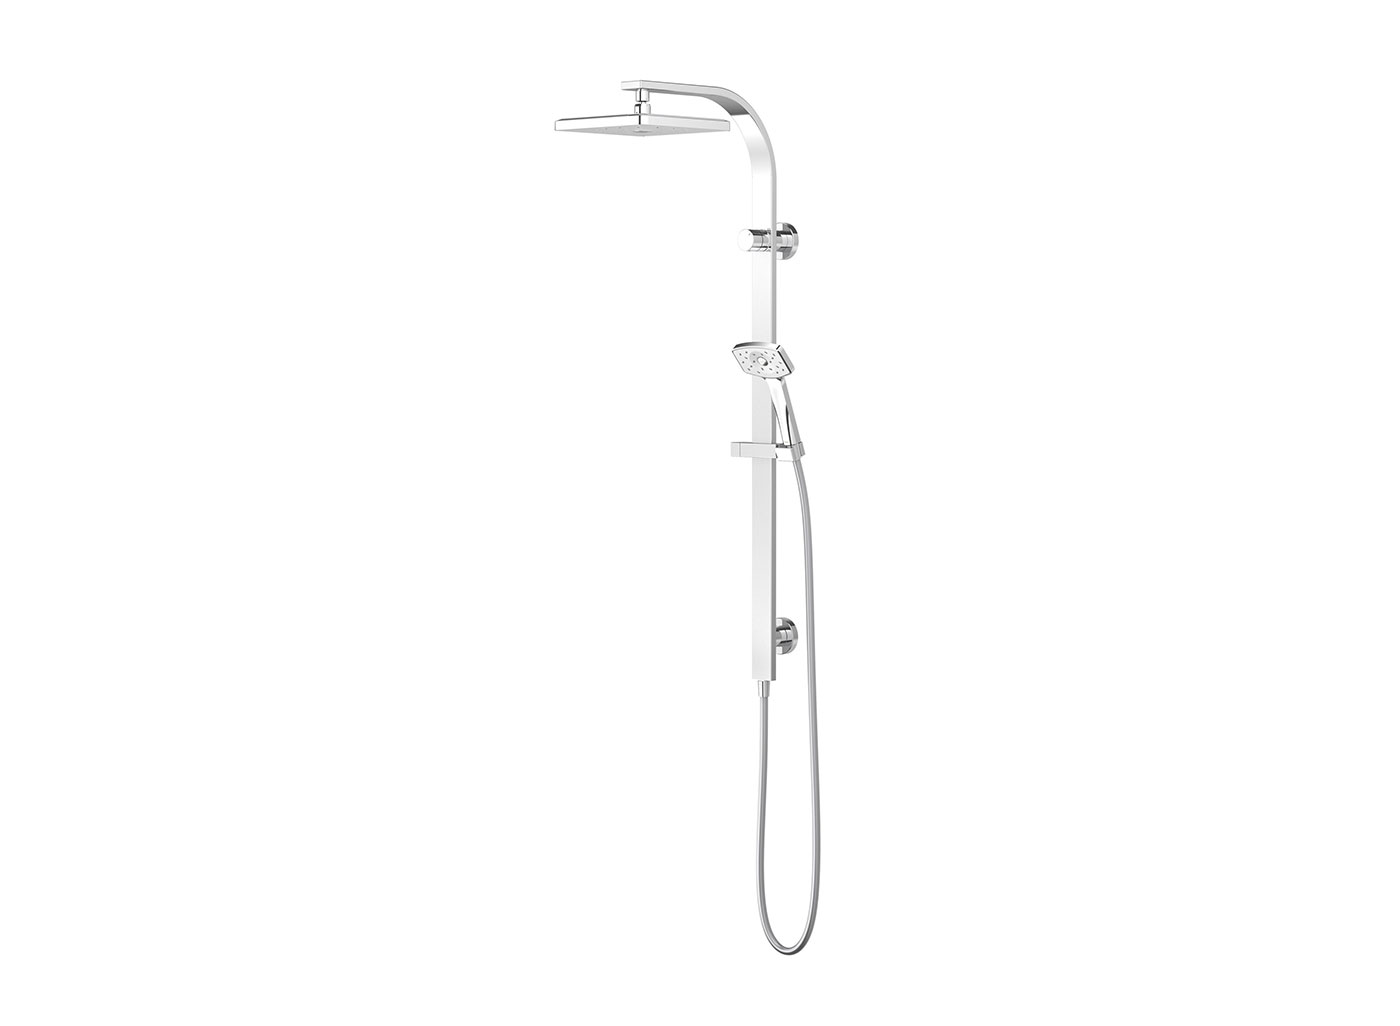 Curved edges and faces soften the geometric styling of Waipori Satinjet® shower range